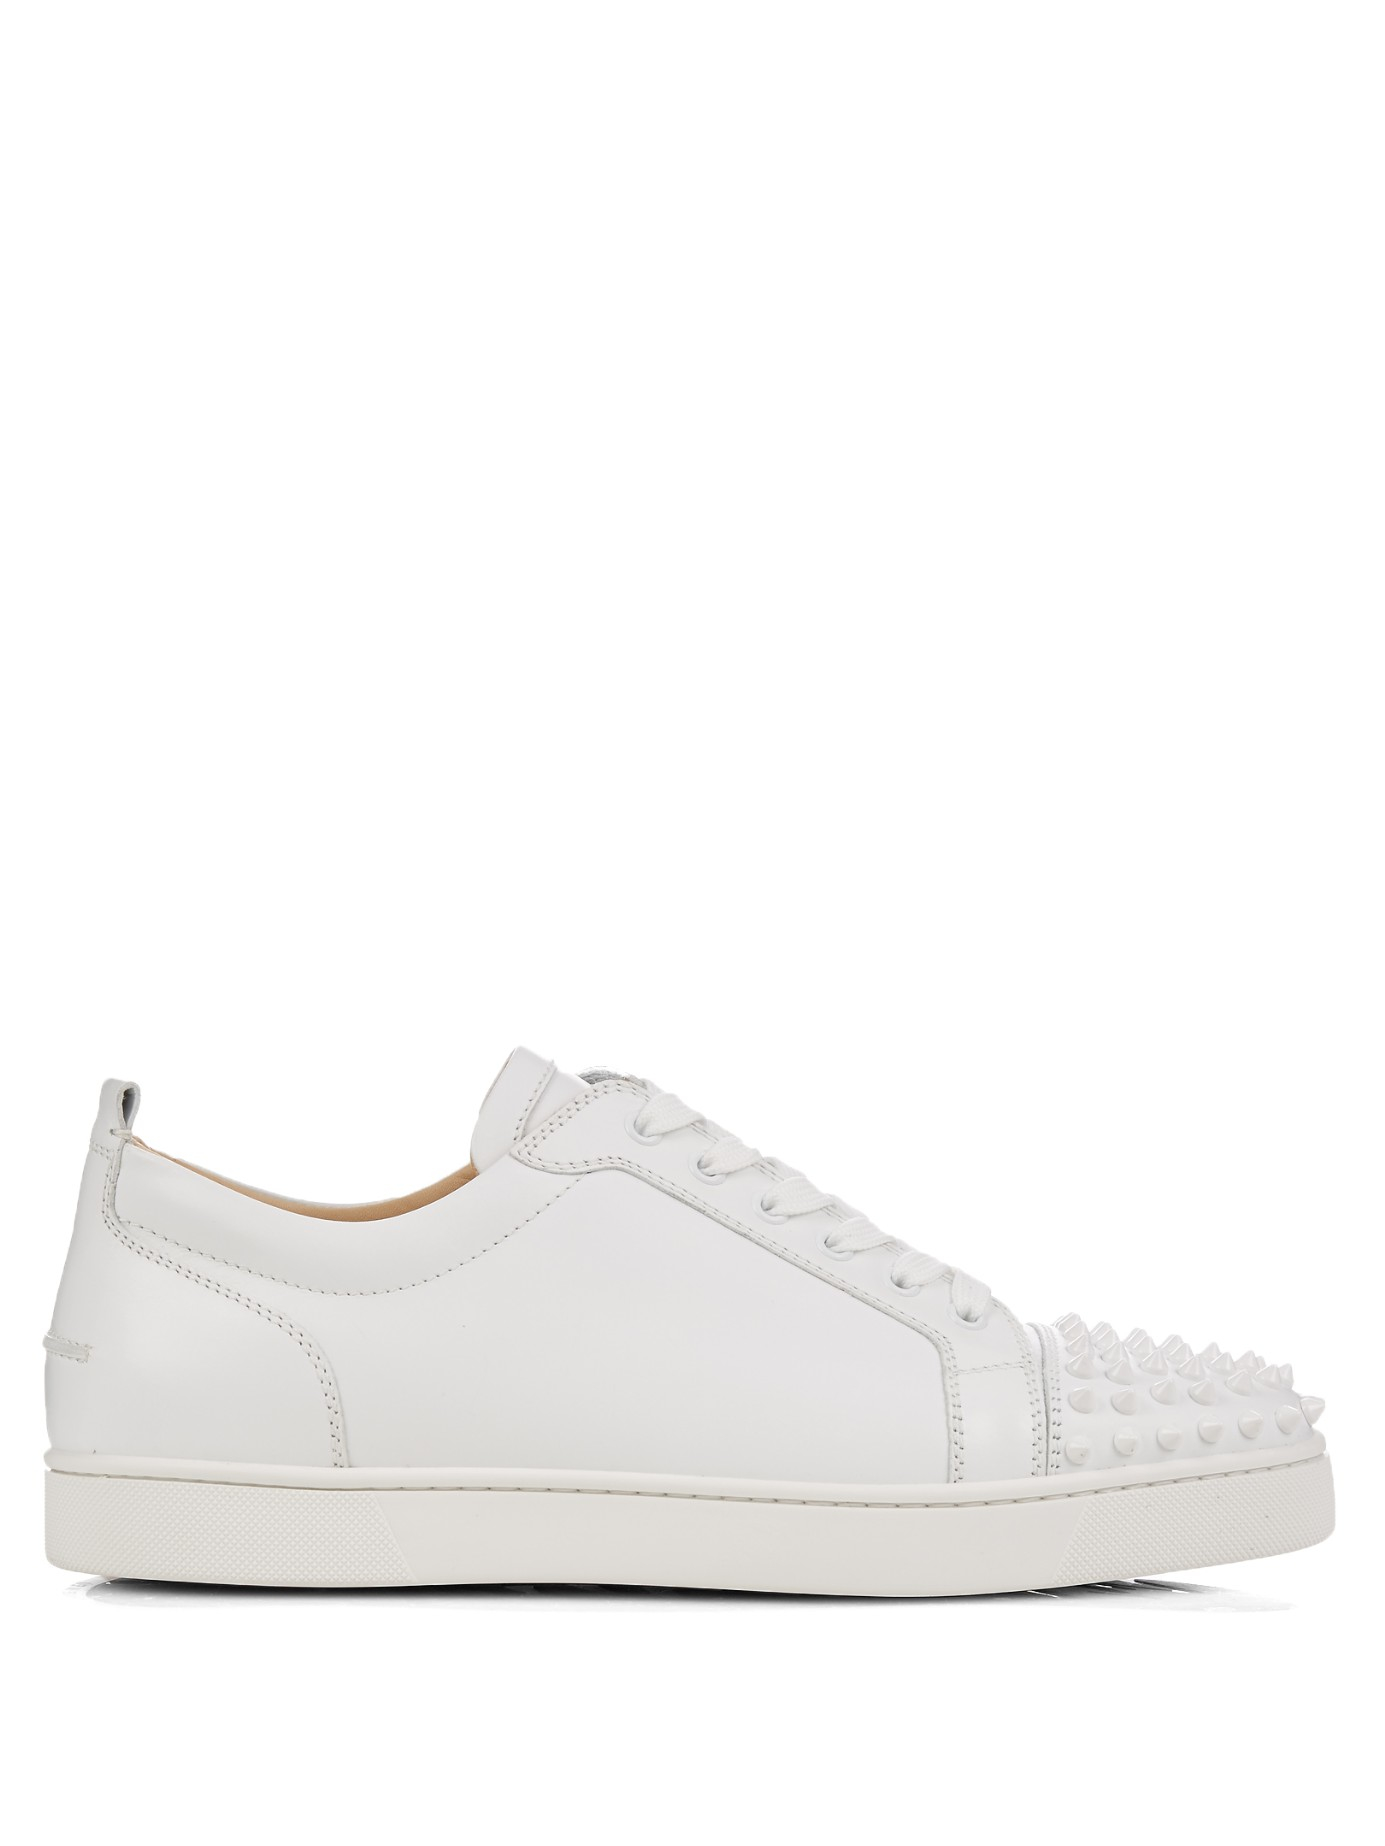 Christian Louboutin Leather Louis Spike-embellished Trainers in White for Men - Lyst